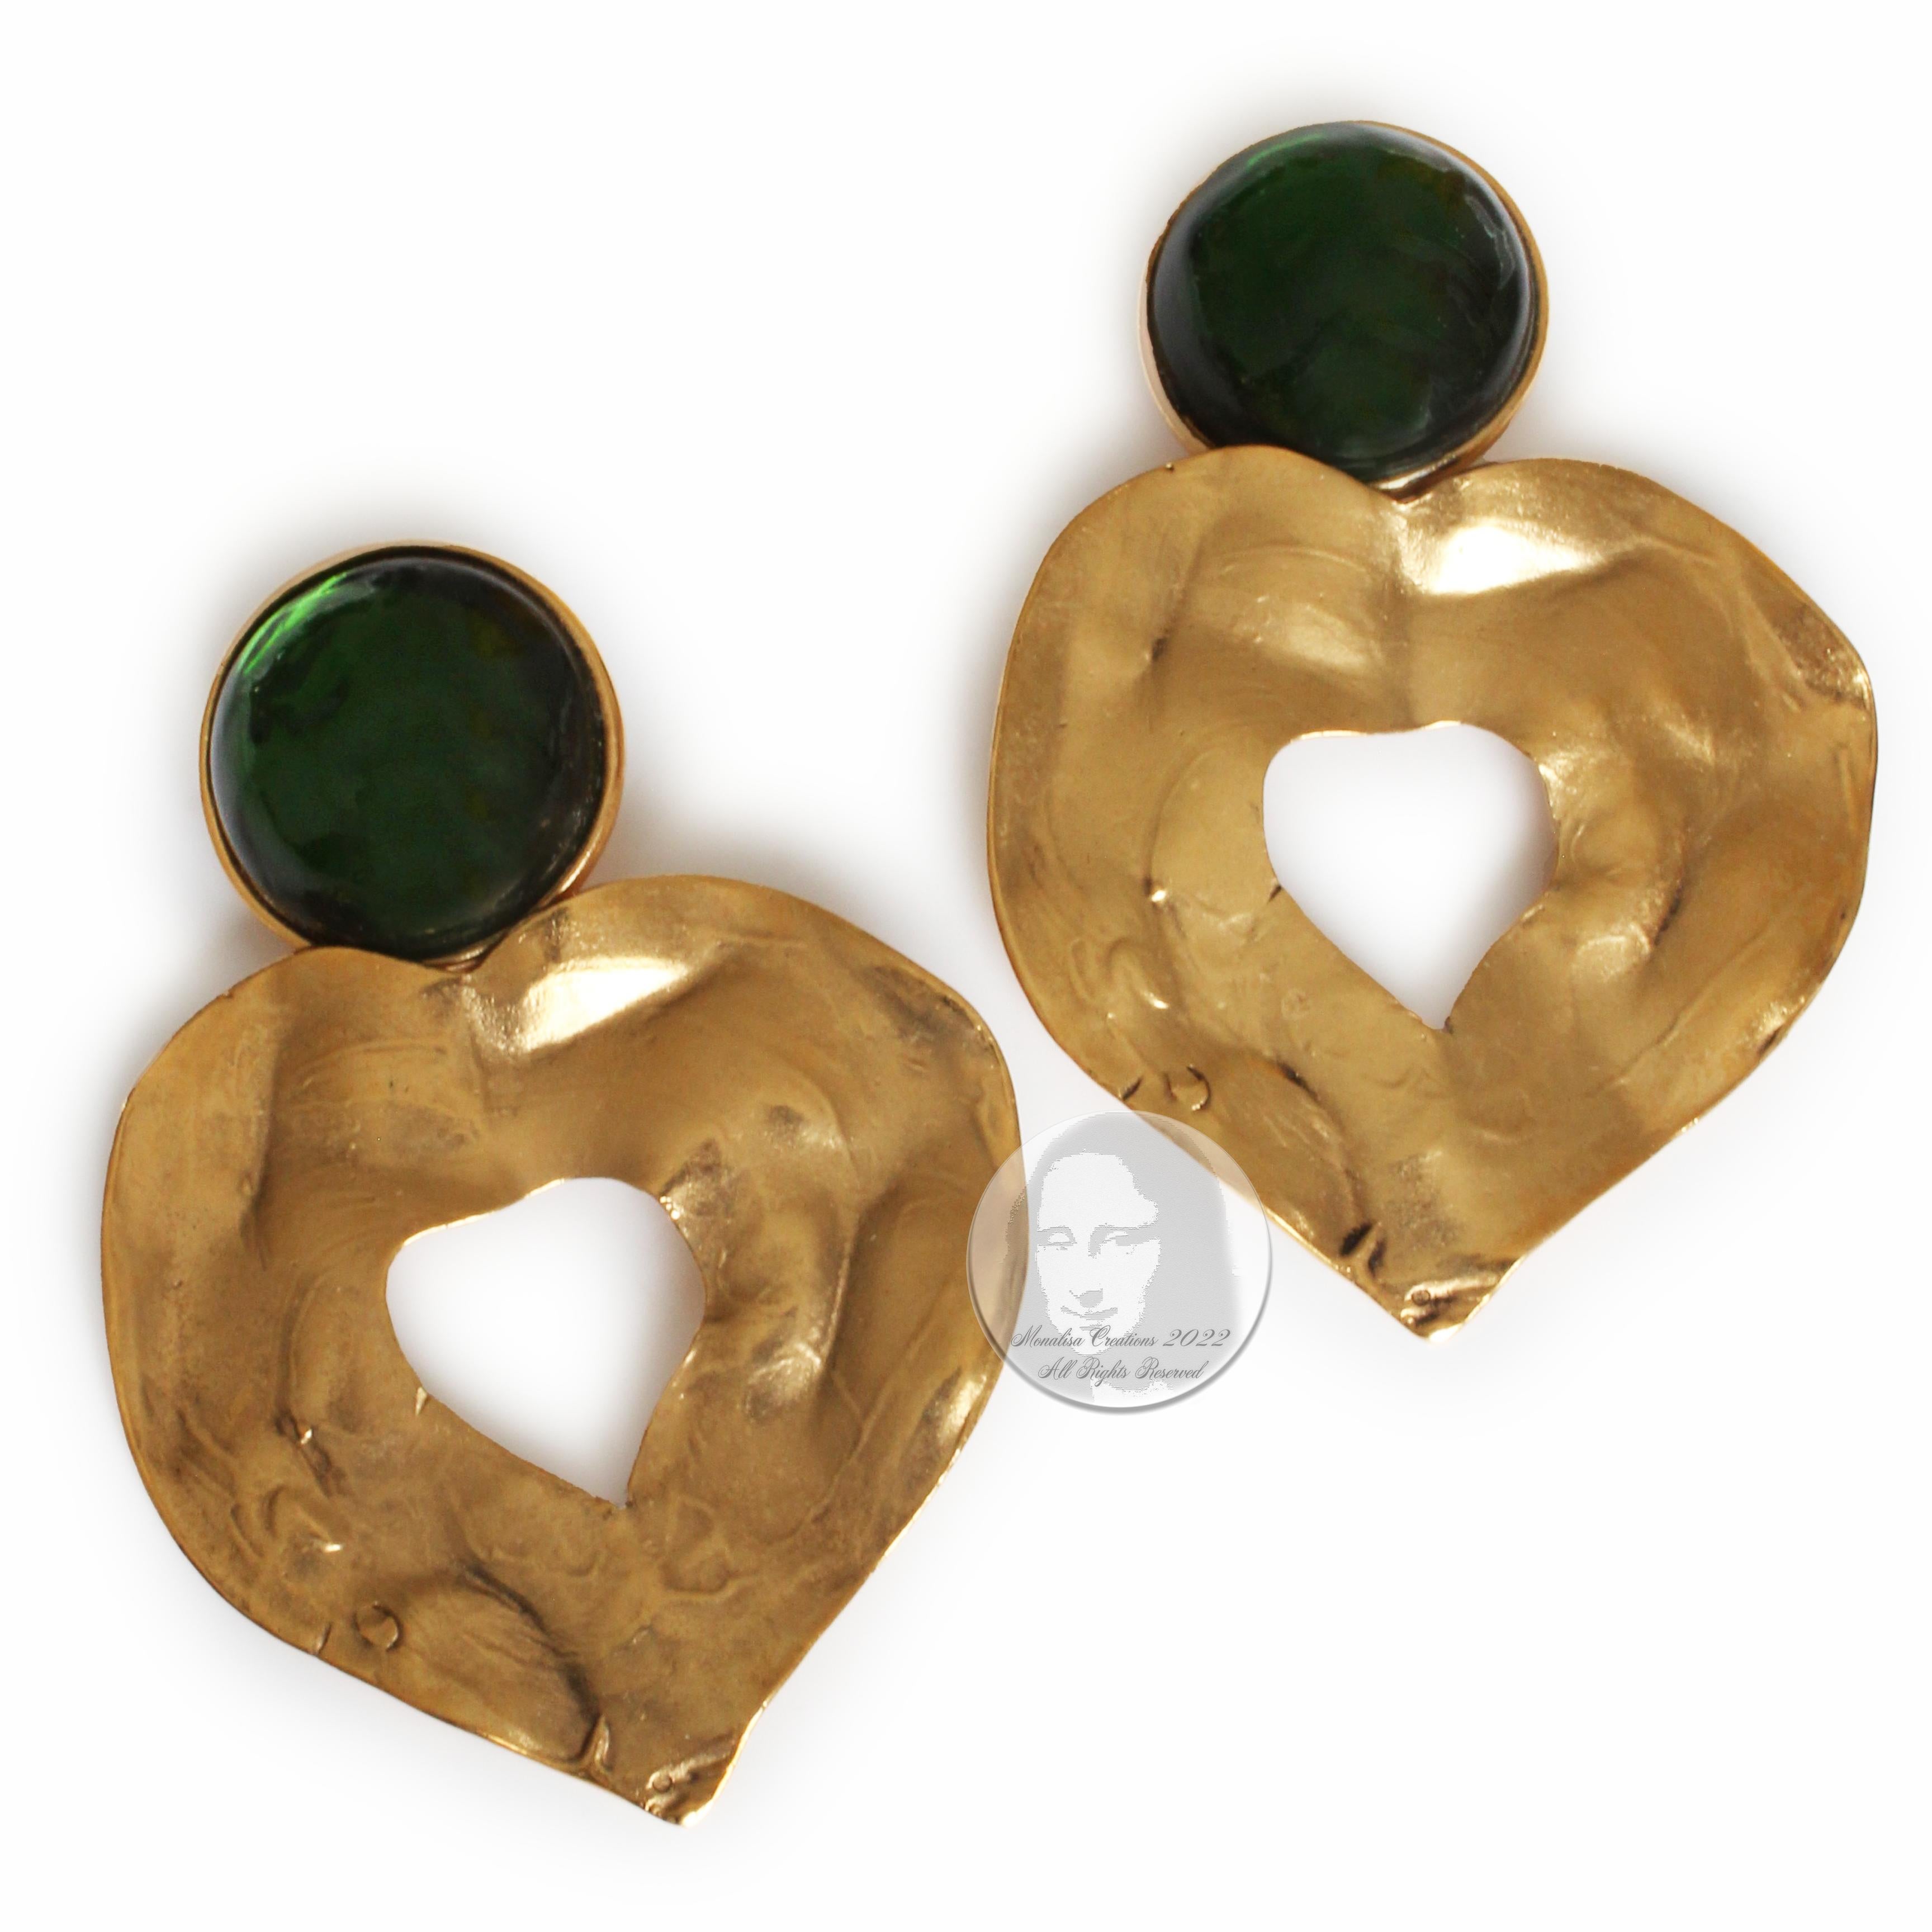 Contemporary Yves Saint Laurent Earrings Massive Gold Hearts Emerald Green Cabochons Vintage